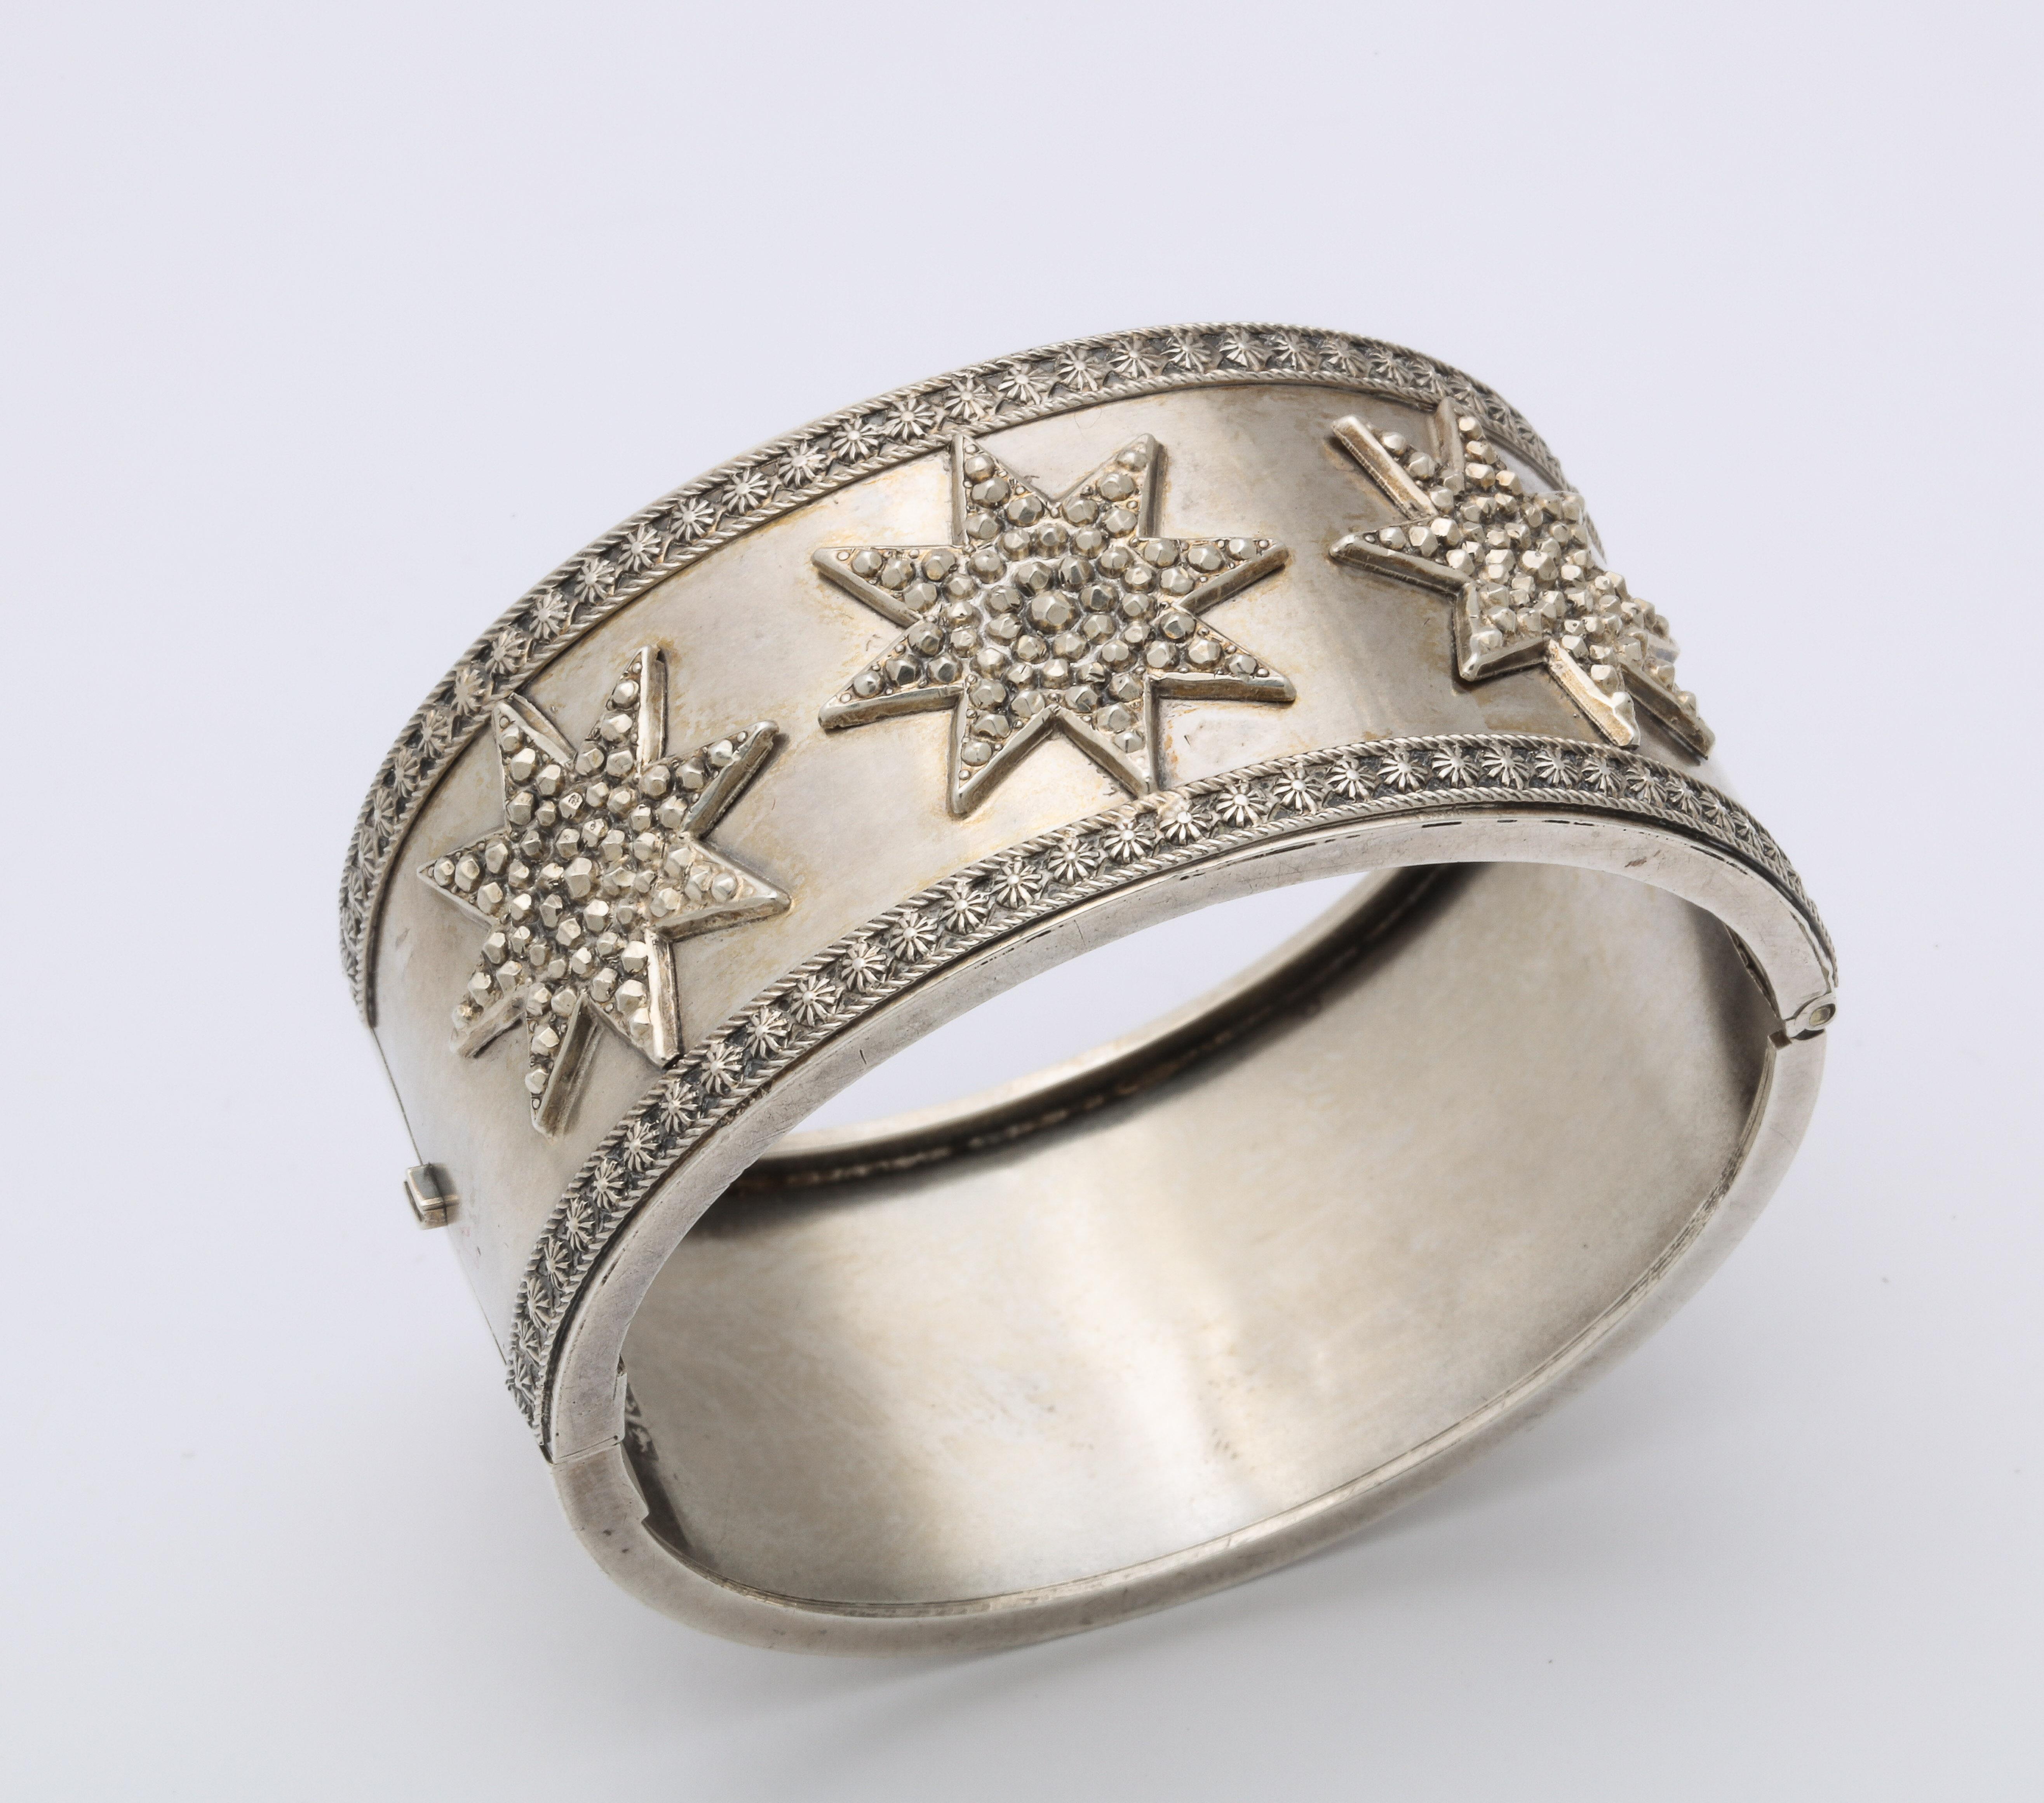 A dazzling, Victorian sterling bracelet, full of hand engraving, struck with three faceted raised stars, is one of the more unusual bracelets made during the silver revolution in Great Britain from c.1860-1880. I have not seen another. Note the